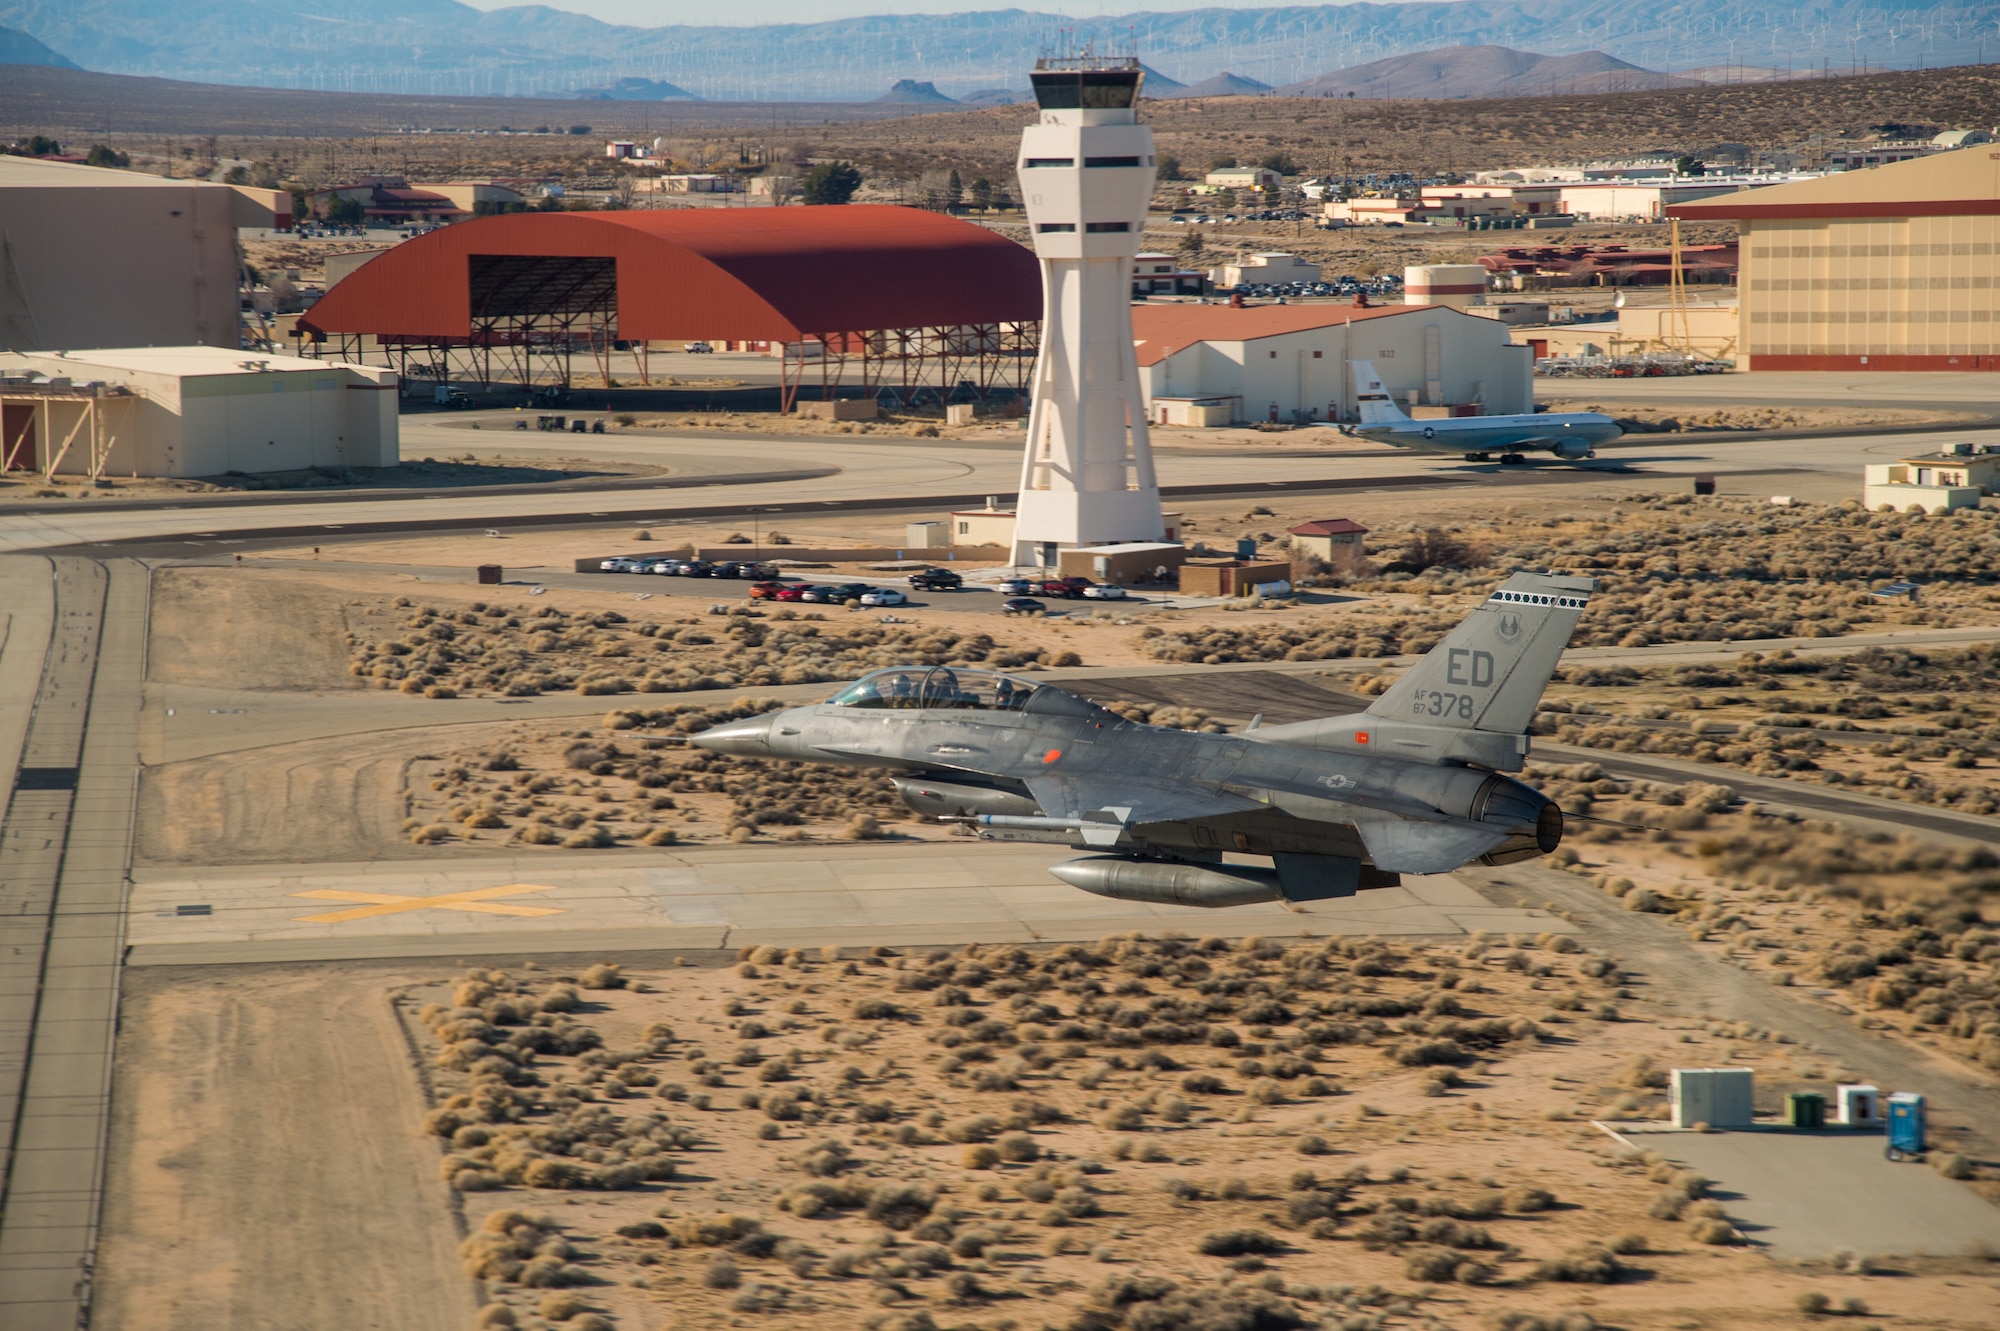 An F-16 Fighting Falcon from the 412th Test Wing’s 416th Flight Test Squadron performs a fly-by of the air control tower at Edwards Air Force Base, California, Jan. 10. The 412th Test Wing will send a KC-135 and three F-16 Fighting Falcons to conduct a flyover for the NFC championship game at Levi’s Stadium in Santa Clara, California, on Jan. 19. (Air Force photo by Ethan Wagner)